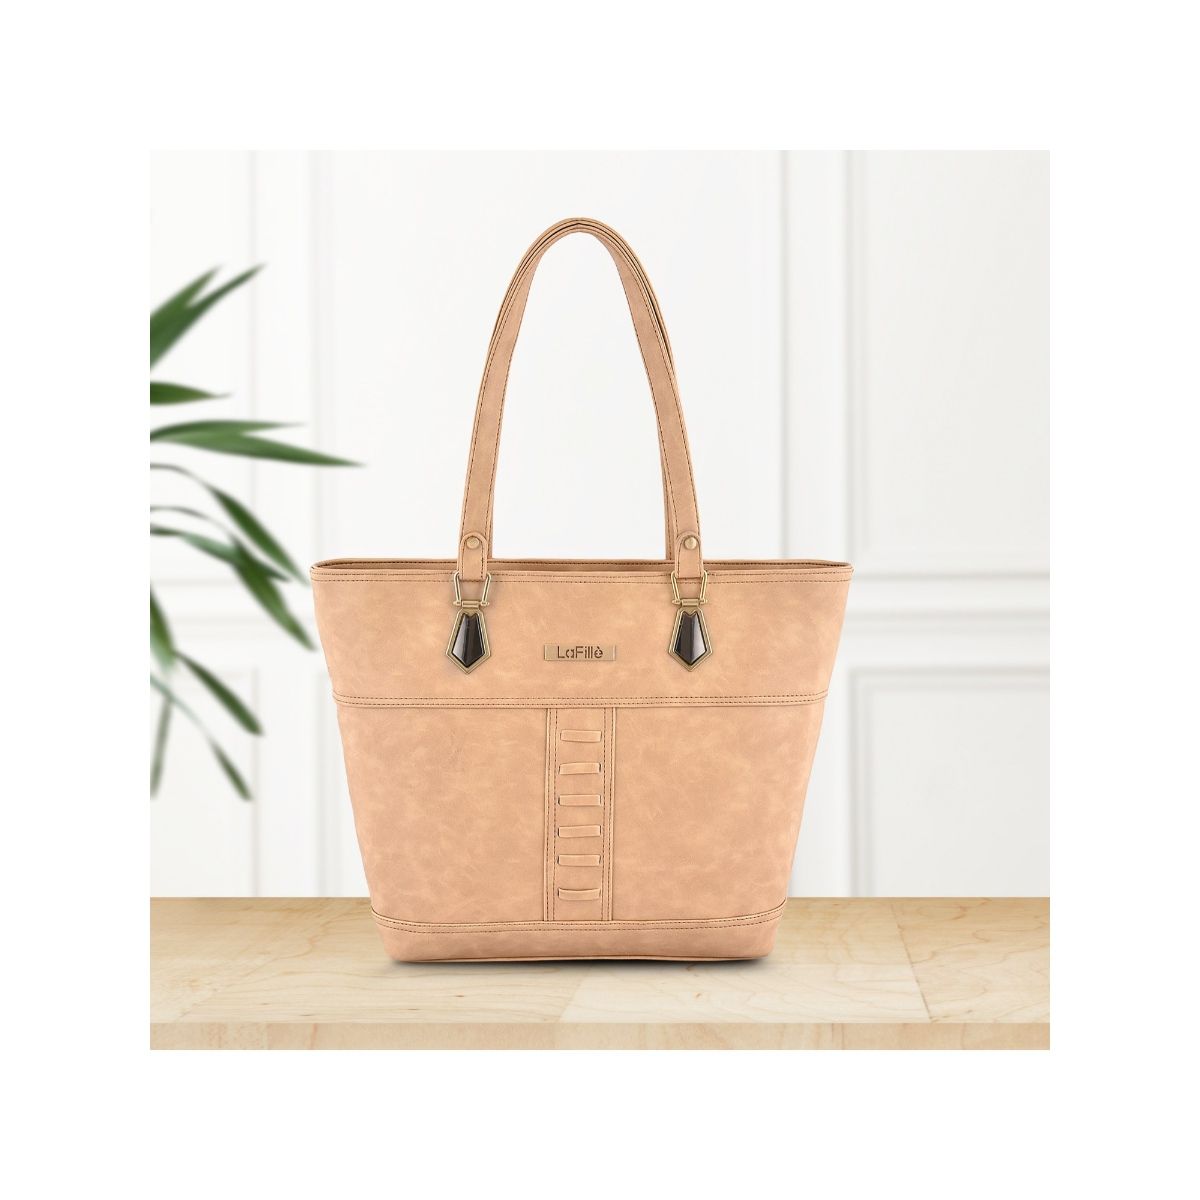 Shop For The Finest Tote Bags At Best Prices Online | Nykaa